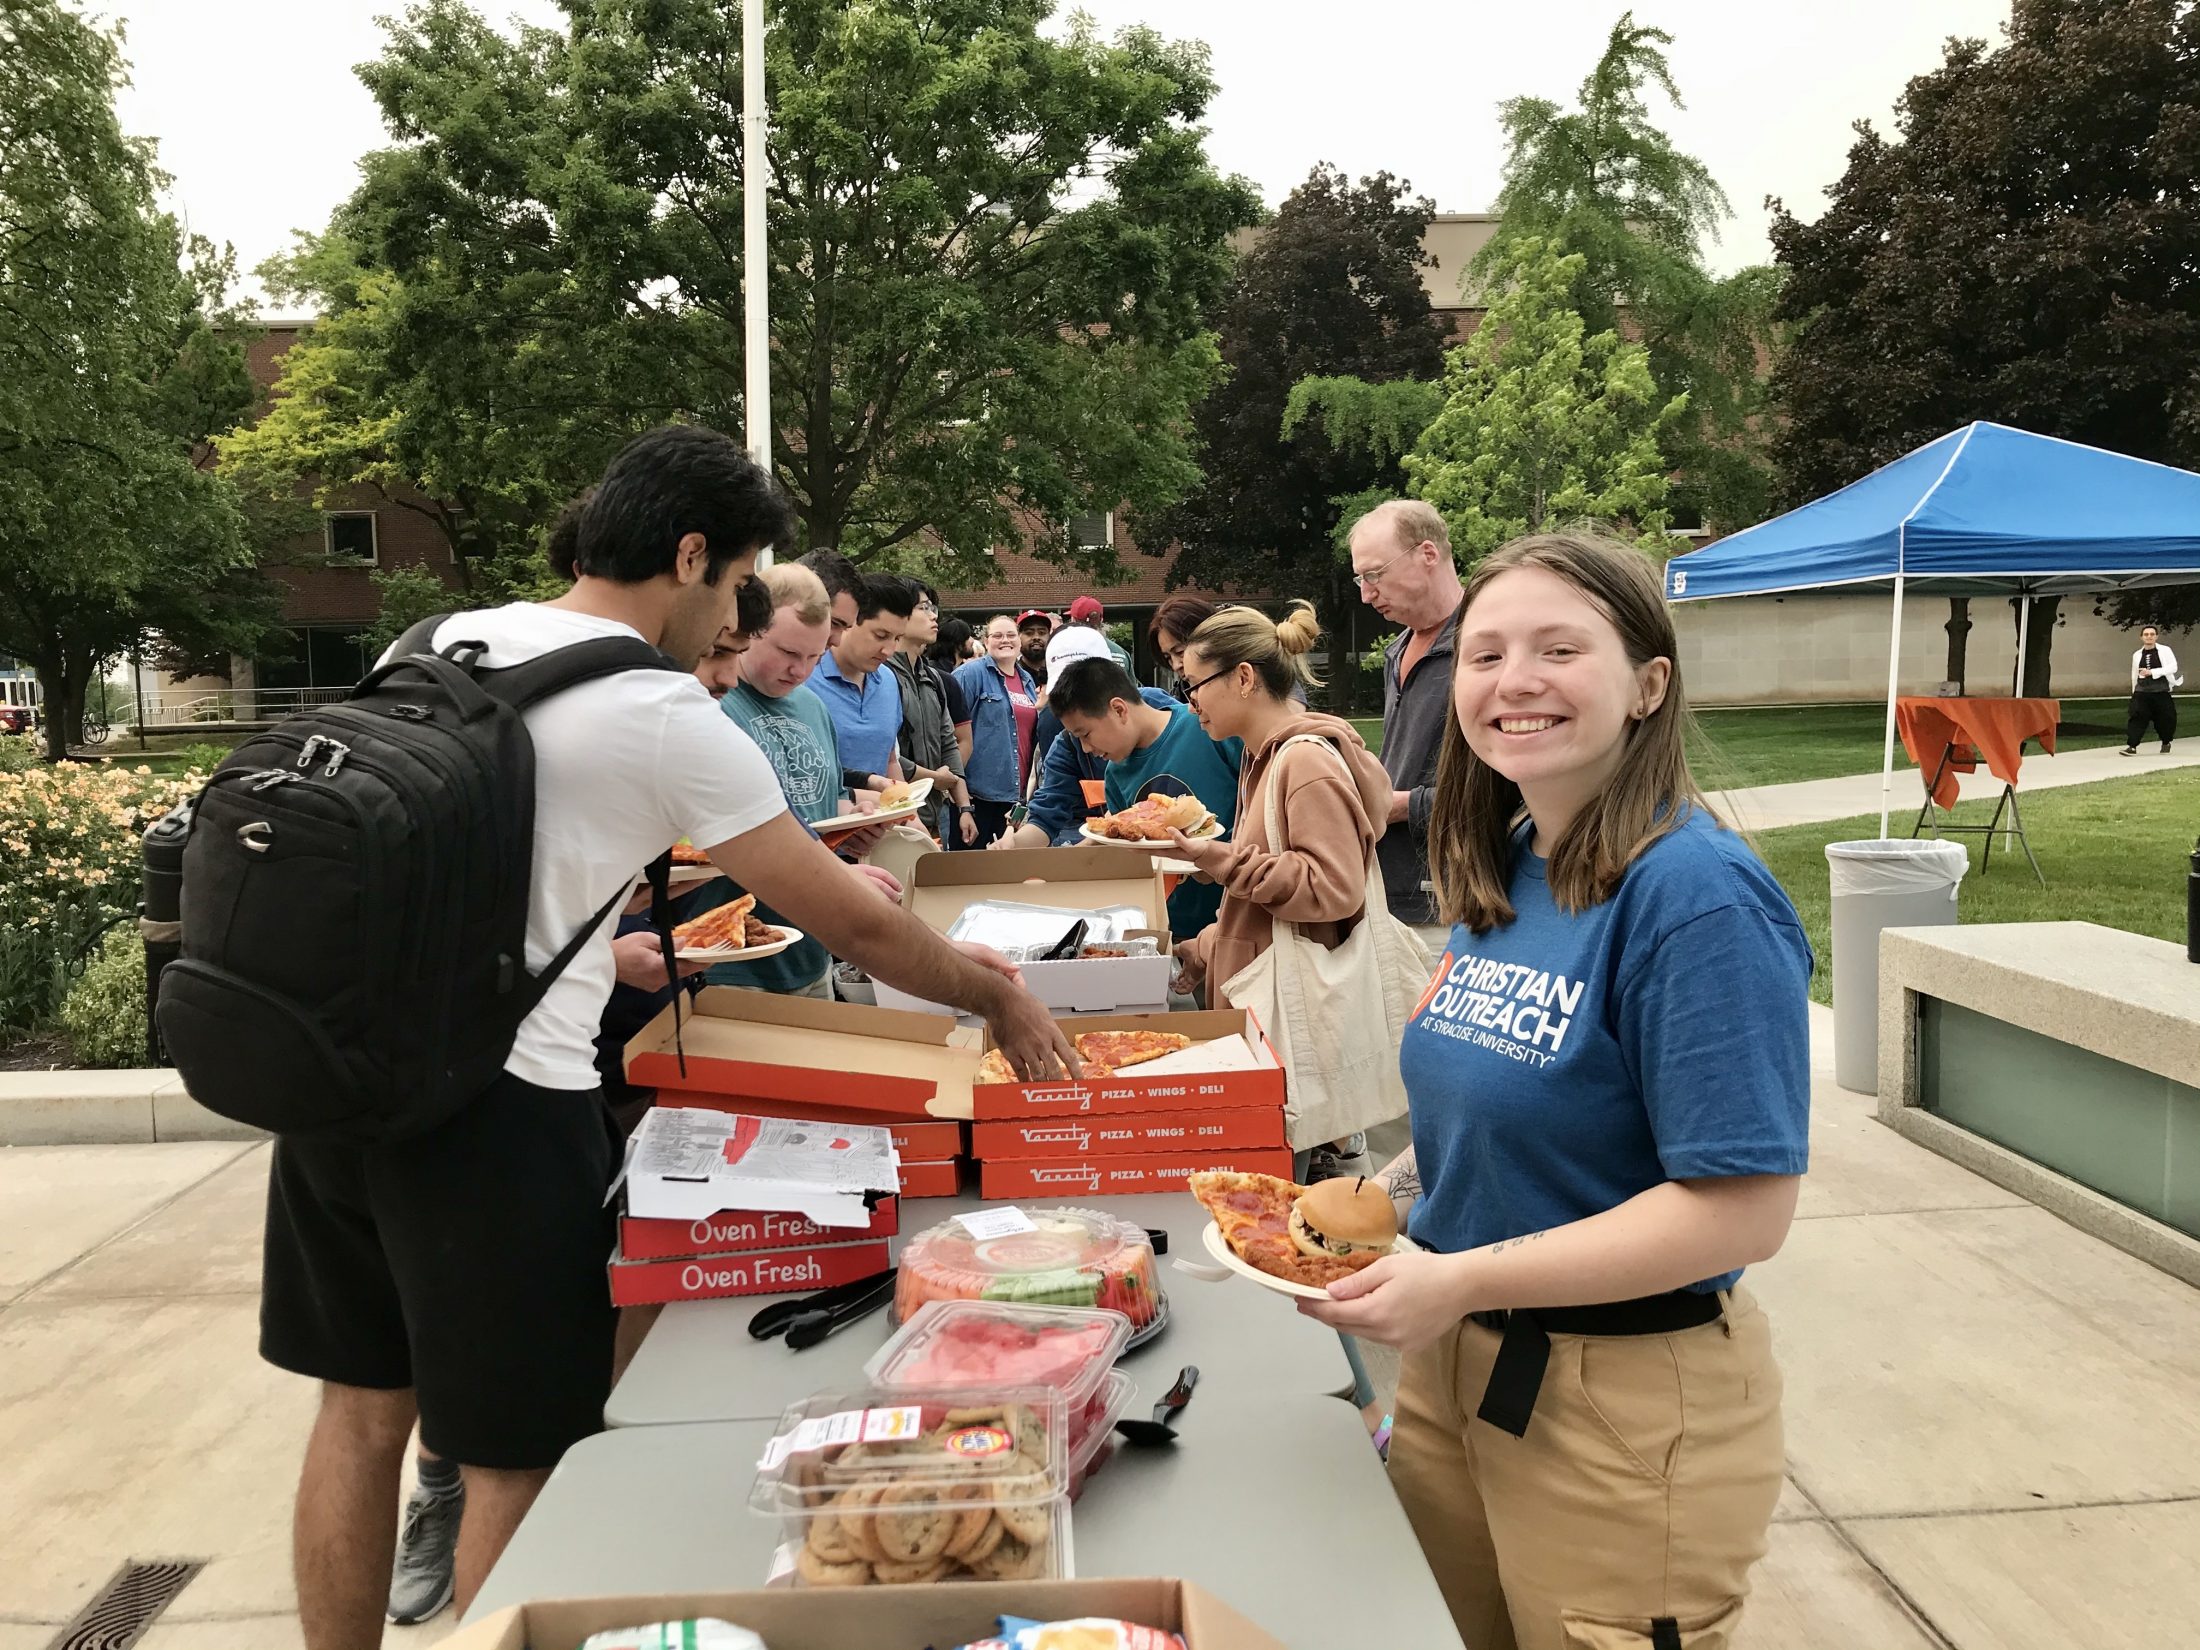 Christian students eat pizza and dinner on Syracuse University's quad.